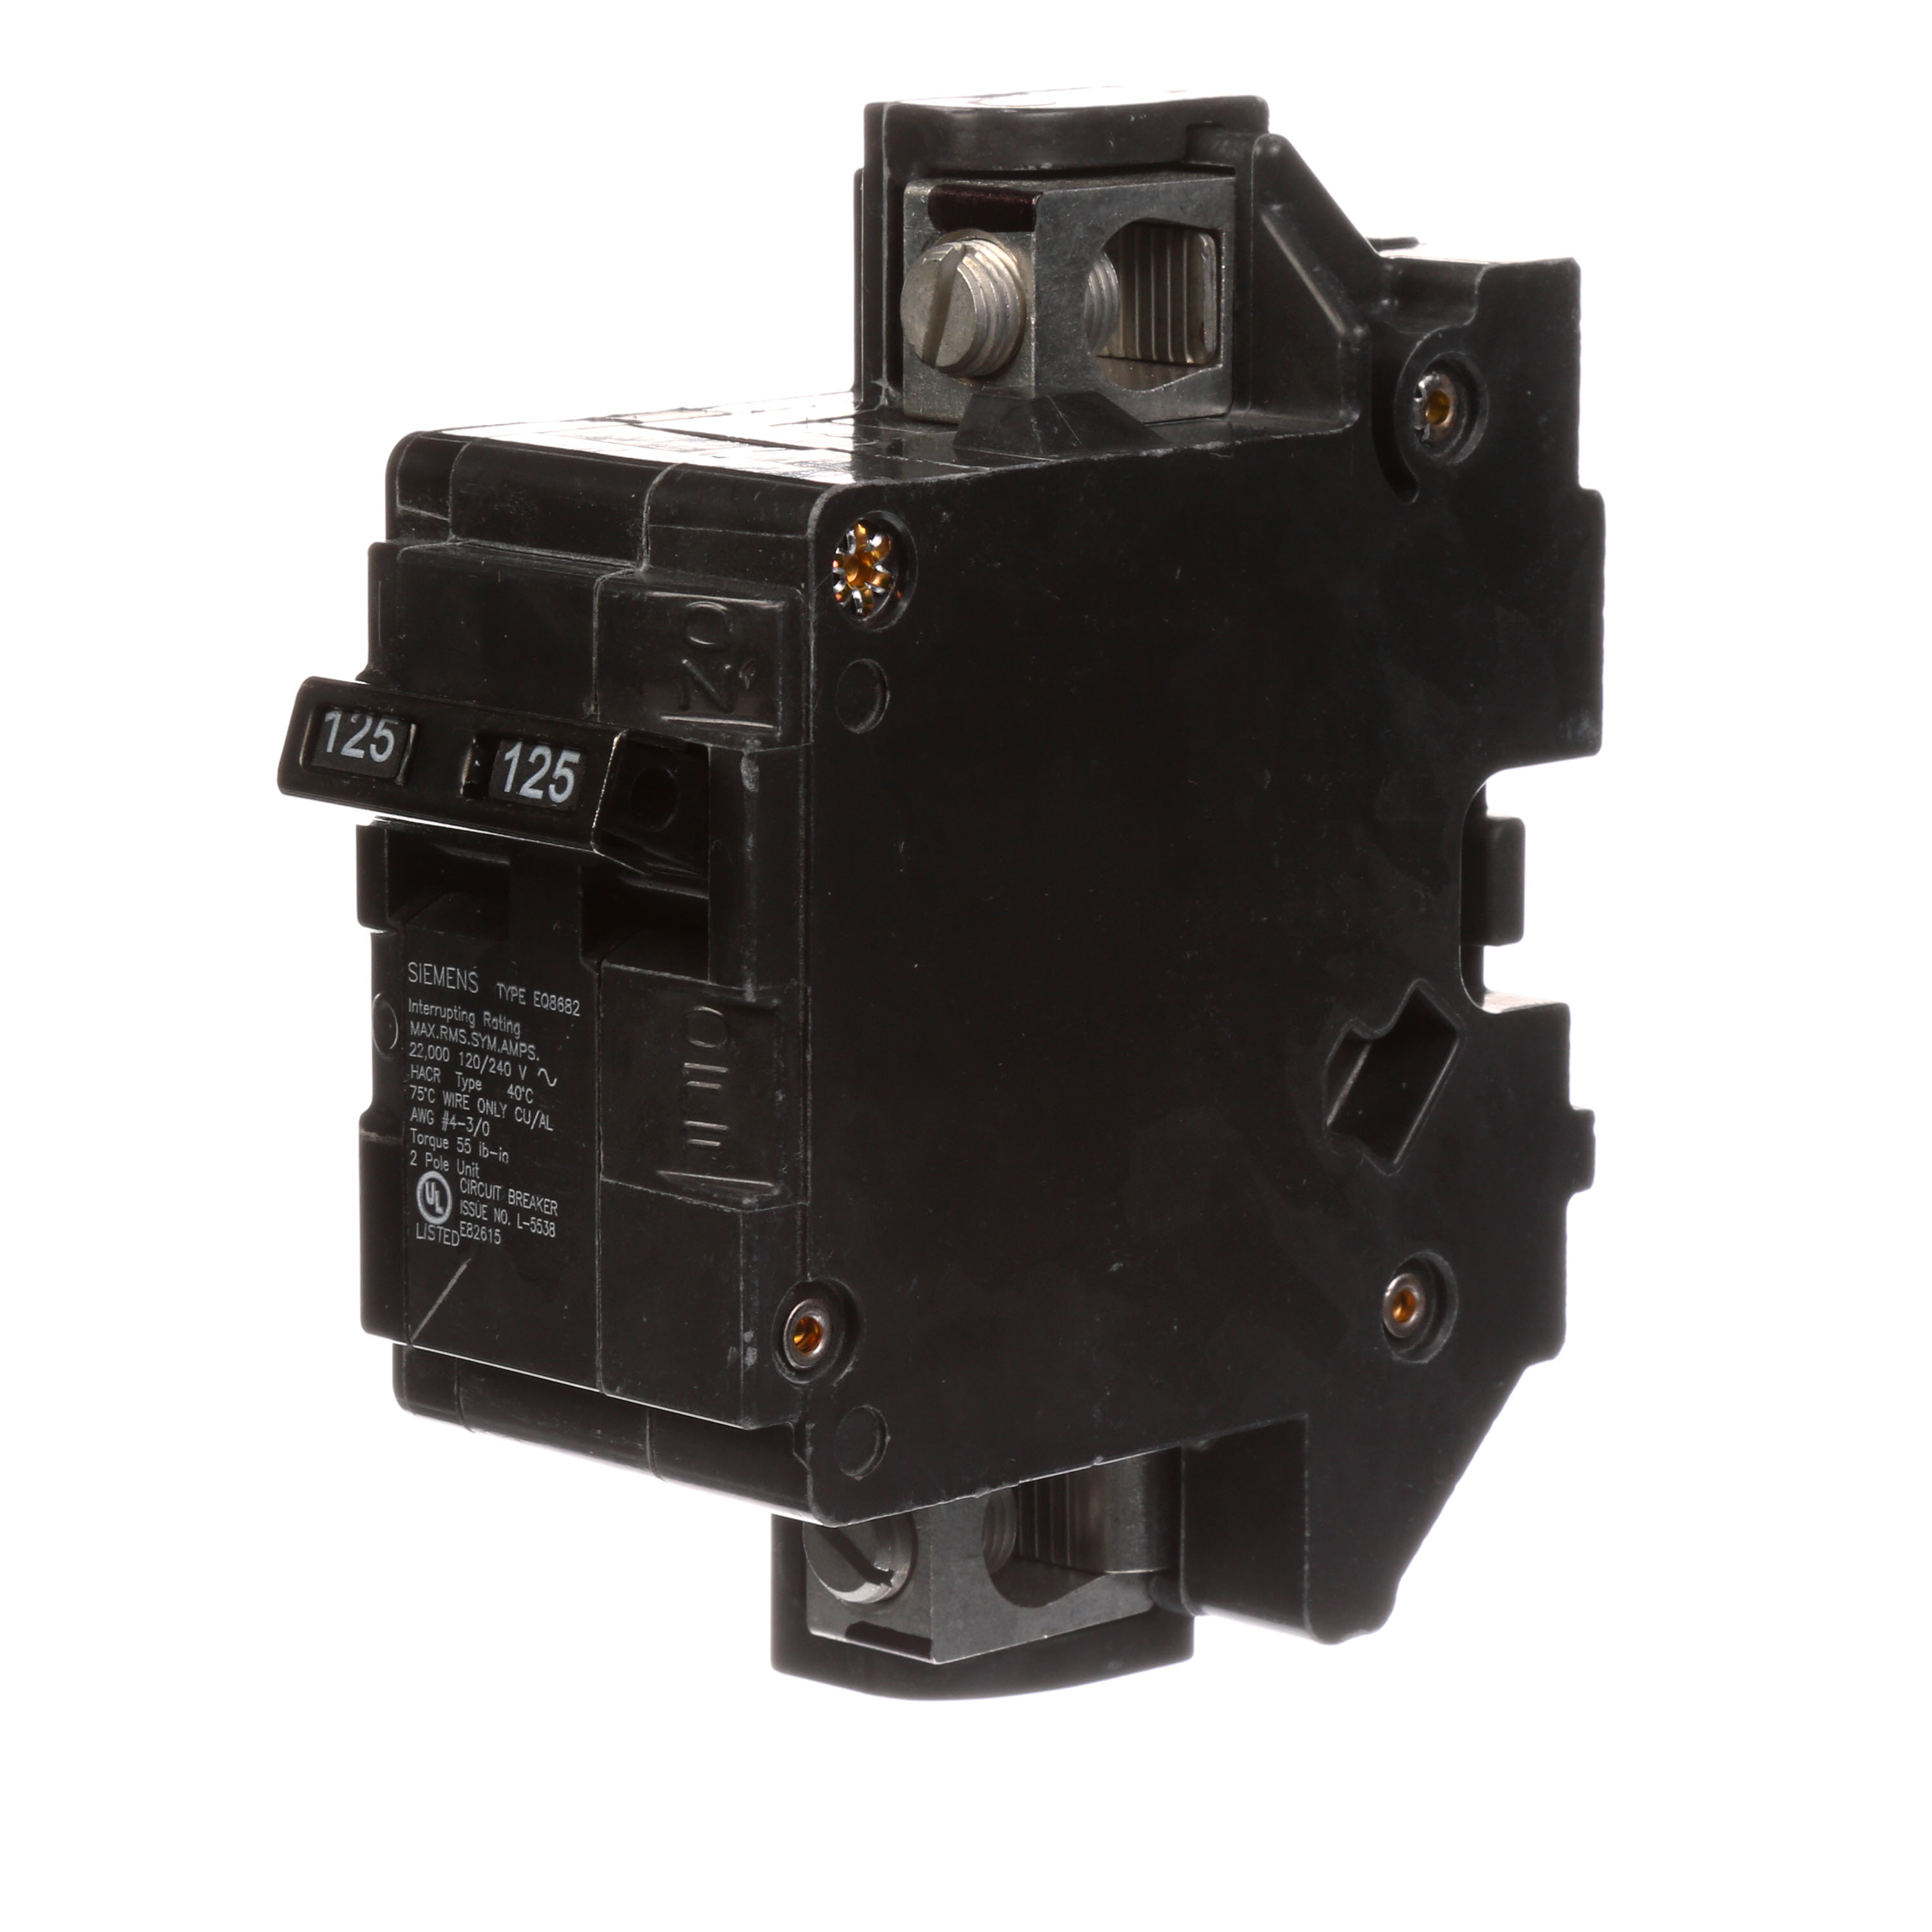 Siemens Low Voltage Residential Circuit Breakers Main Breakers - Family G Mainsare Circuit Protection Load Center Mains, Feeders, and Miniature Circuit Breakers. Load center conversion kit 1-Phase main breaker.. Rated (125A) AIR 22 KA.